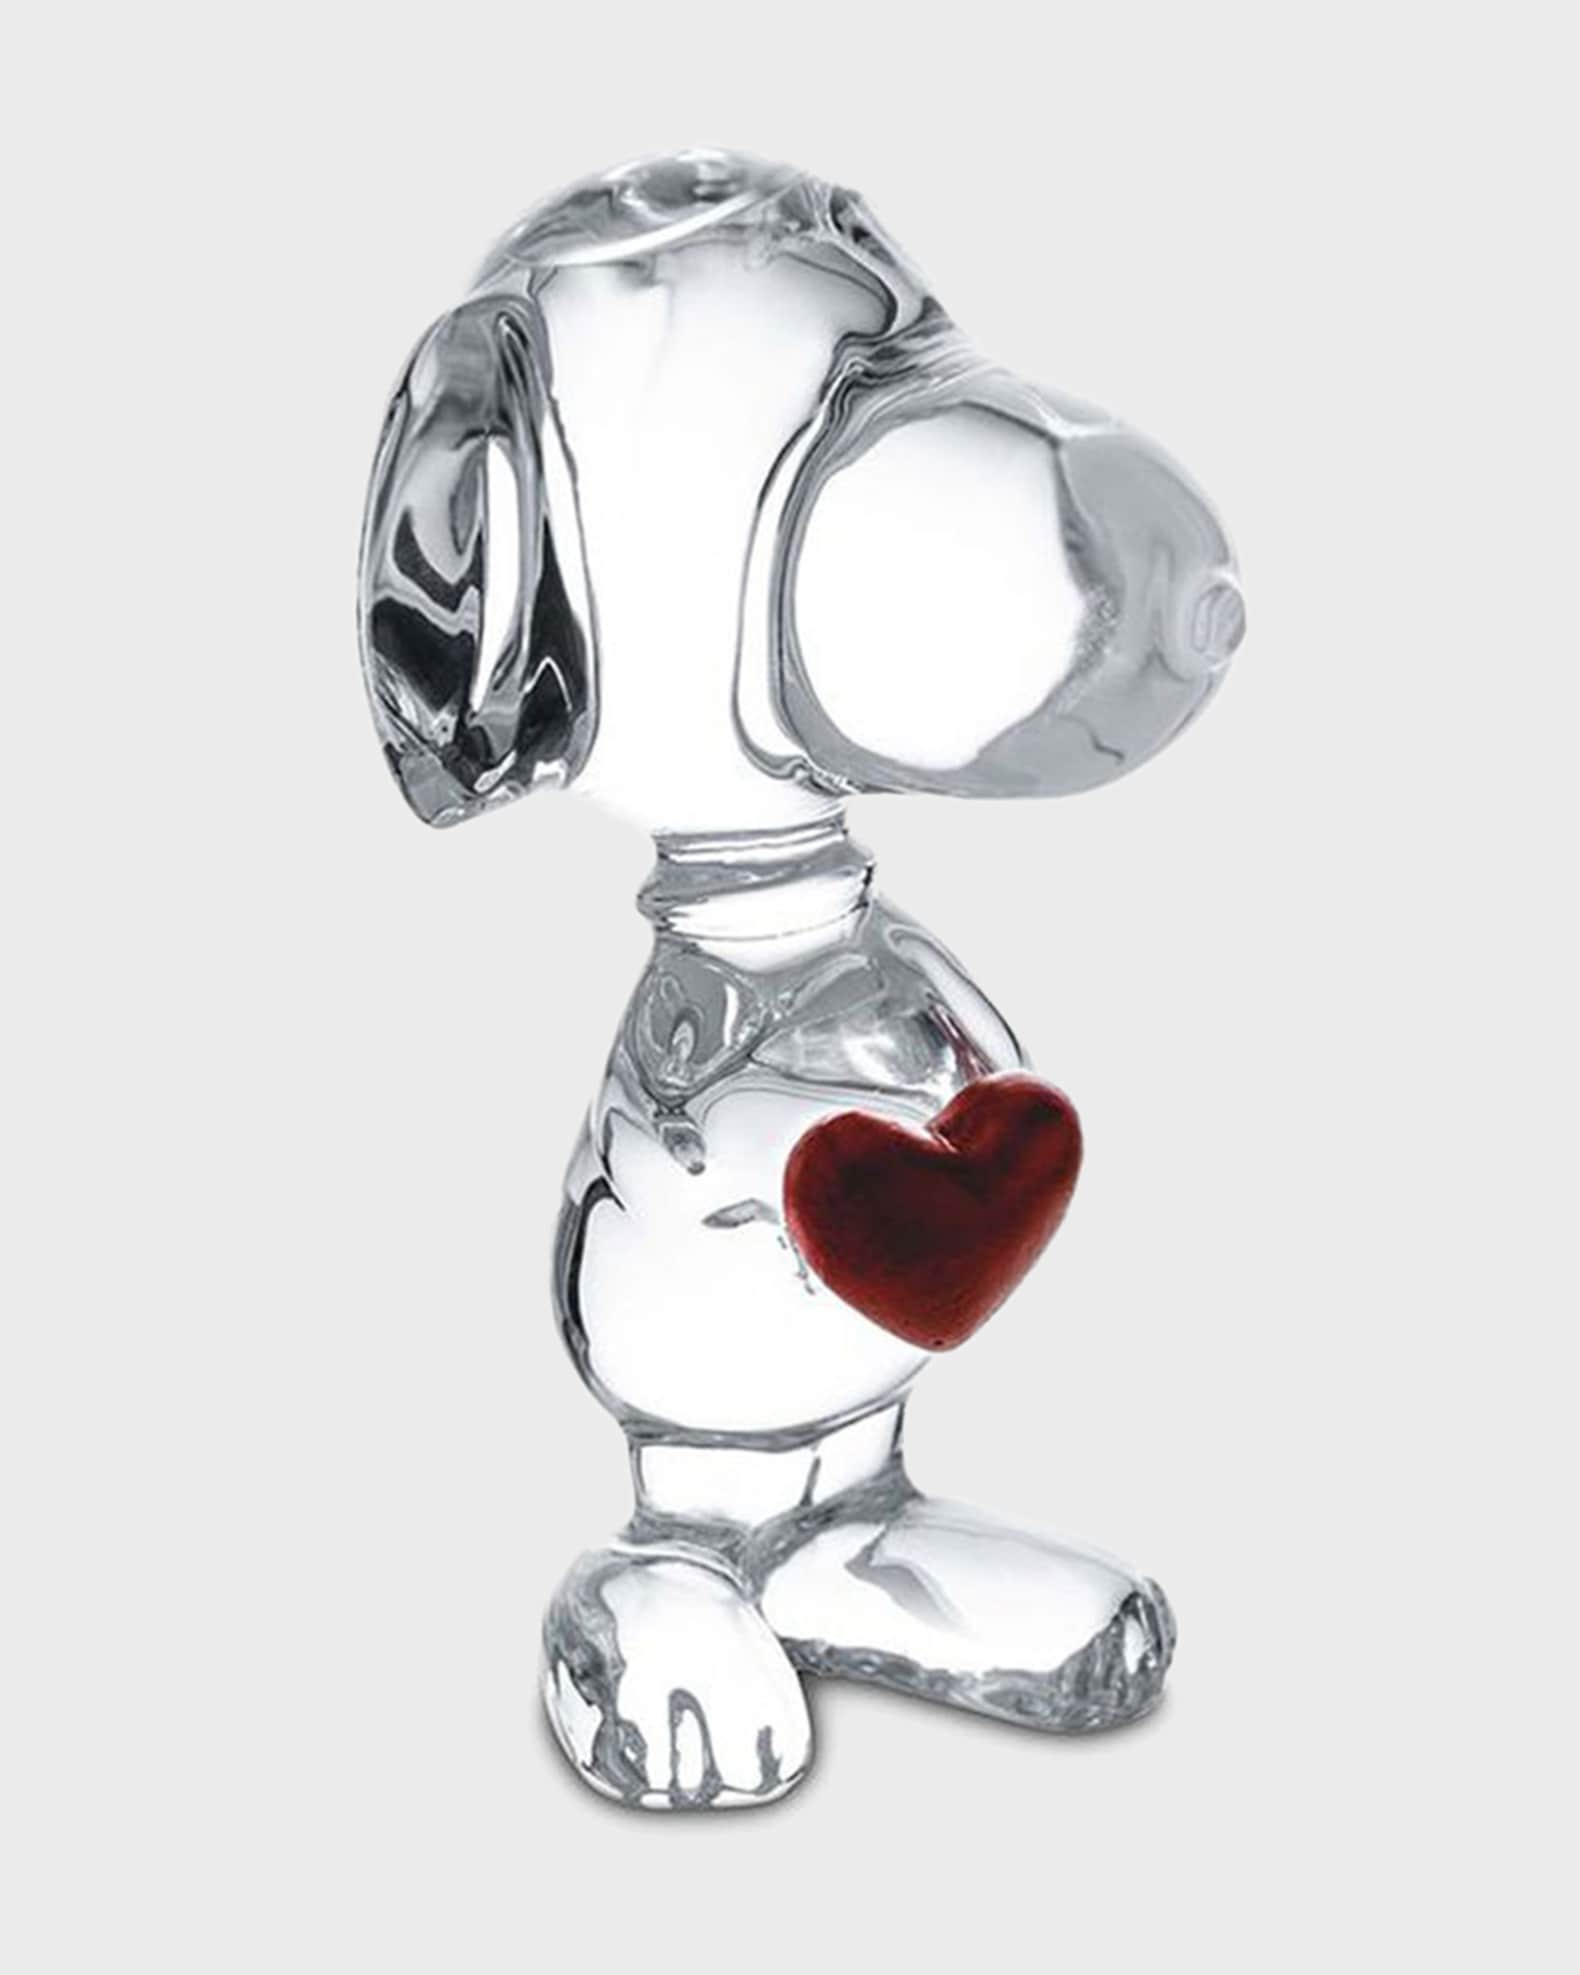 Snoopy with Heart Figurine